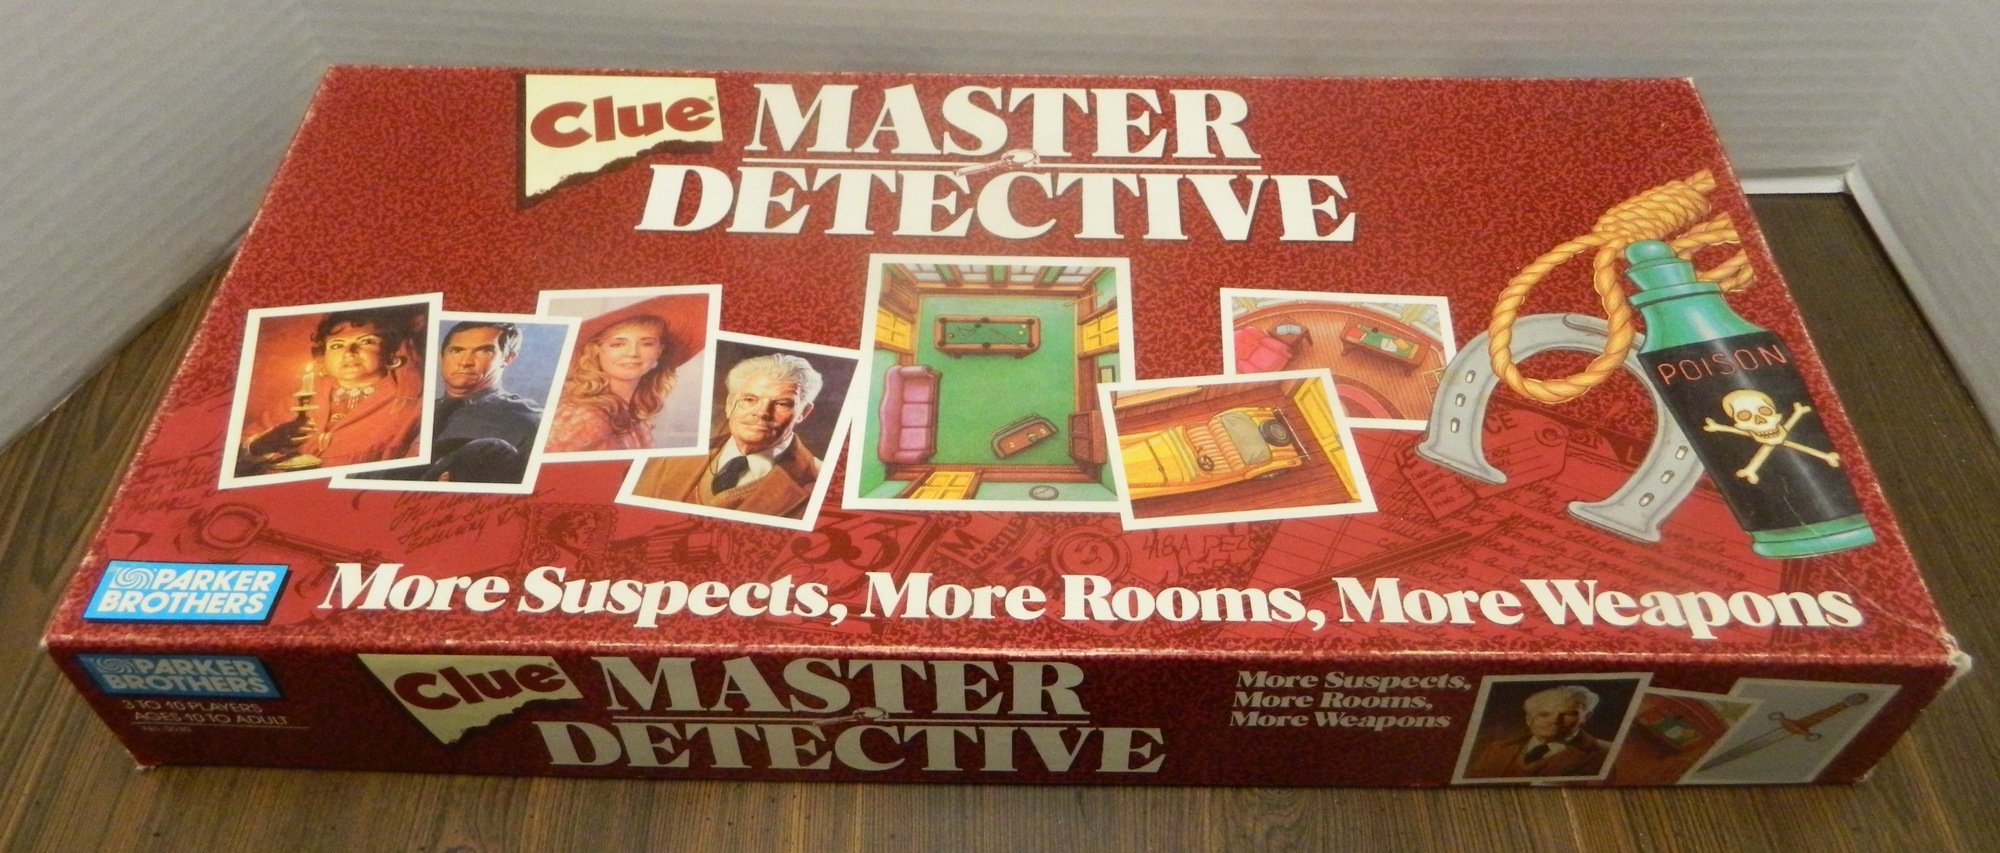 Clue Master Detective Board Game Review Geeky Hobbies